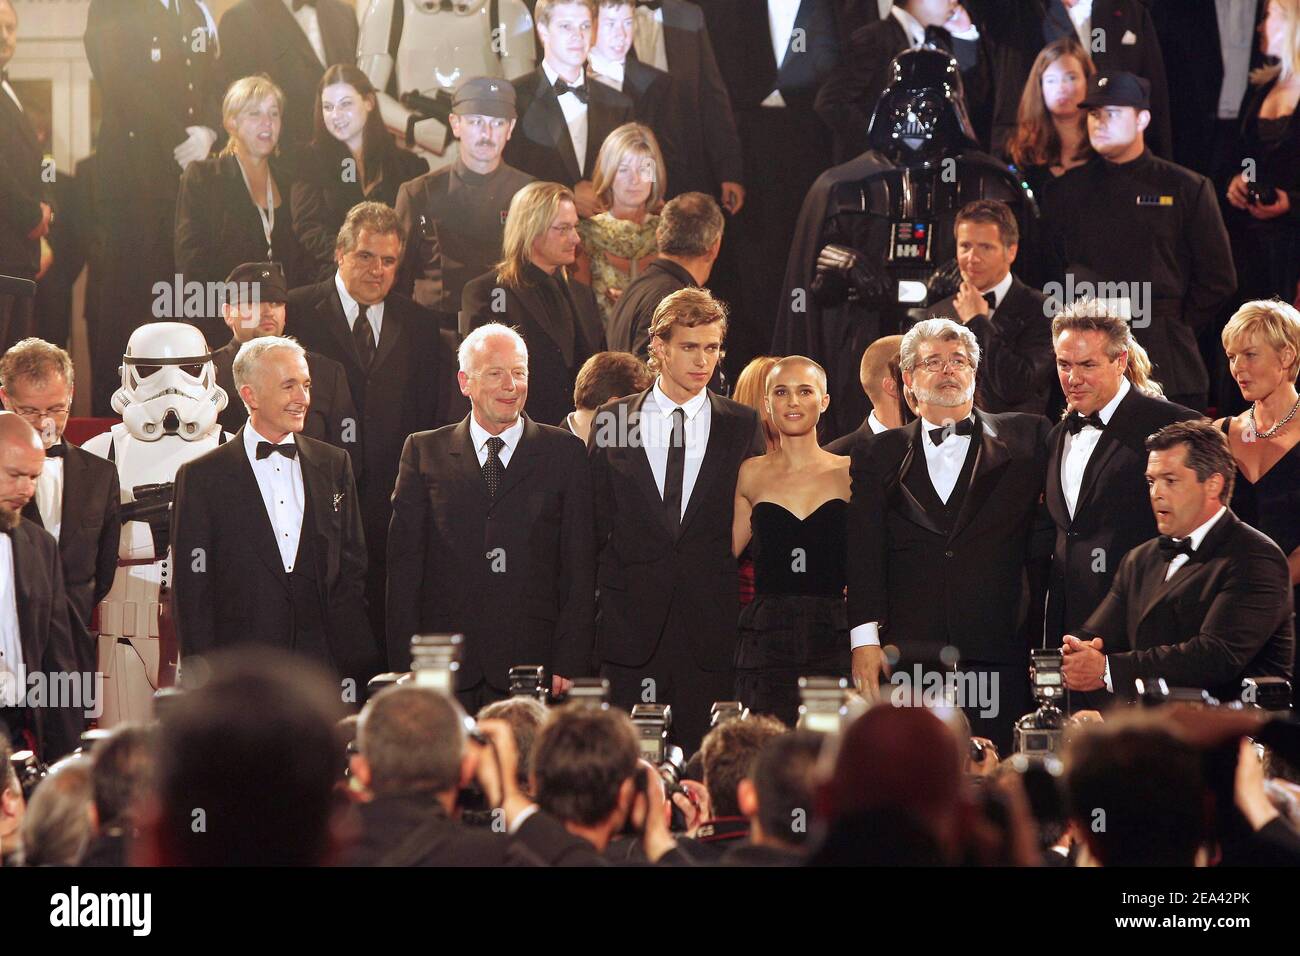 Cast members Anthony Daniels, Ian McDiarmid, Hayden Christensen and Natalie Portman with director George Lucas at the end of George Lucas film 'Star Wars Episode 3 Revenge of the Sith' World Premiere presented out of competition at the 58th Cannes Film Festival in Cannes, France on May 15, 2005. Photo by Hahn-Nebinger-Klein/ABACA Stock Photo